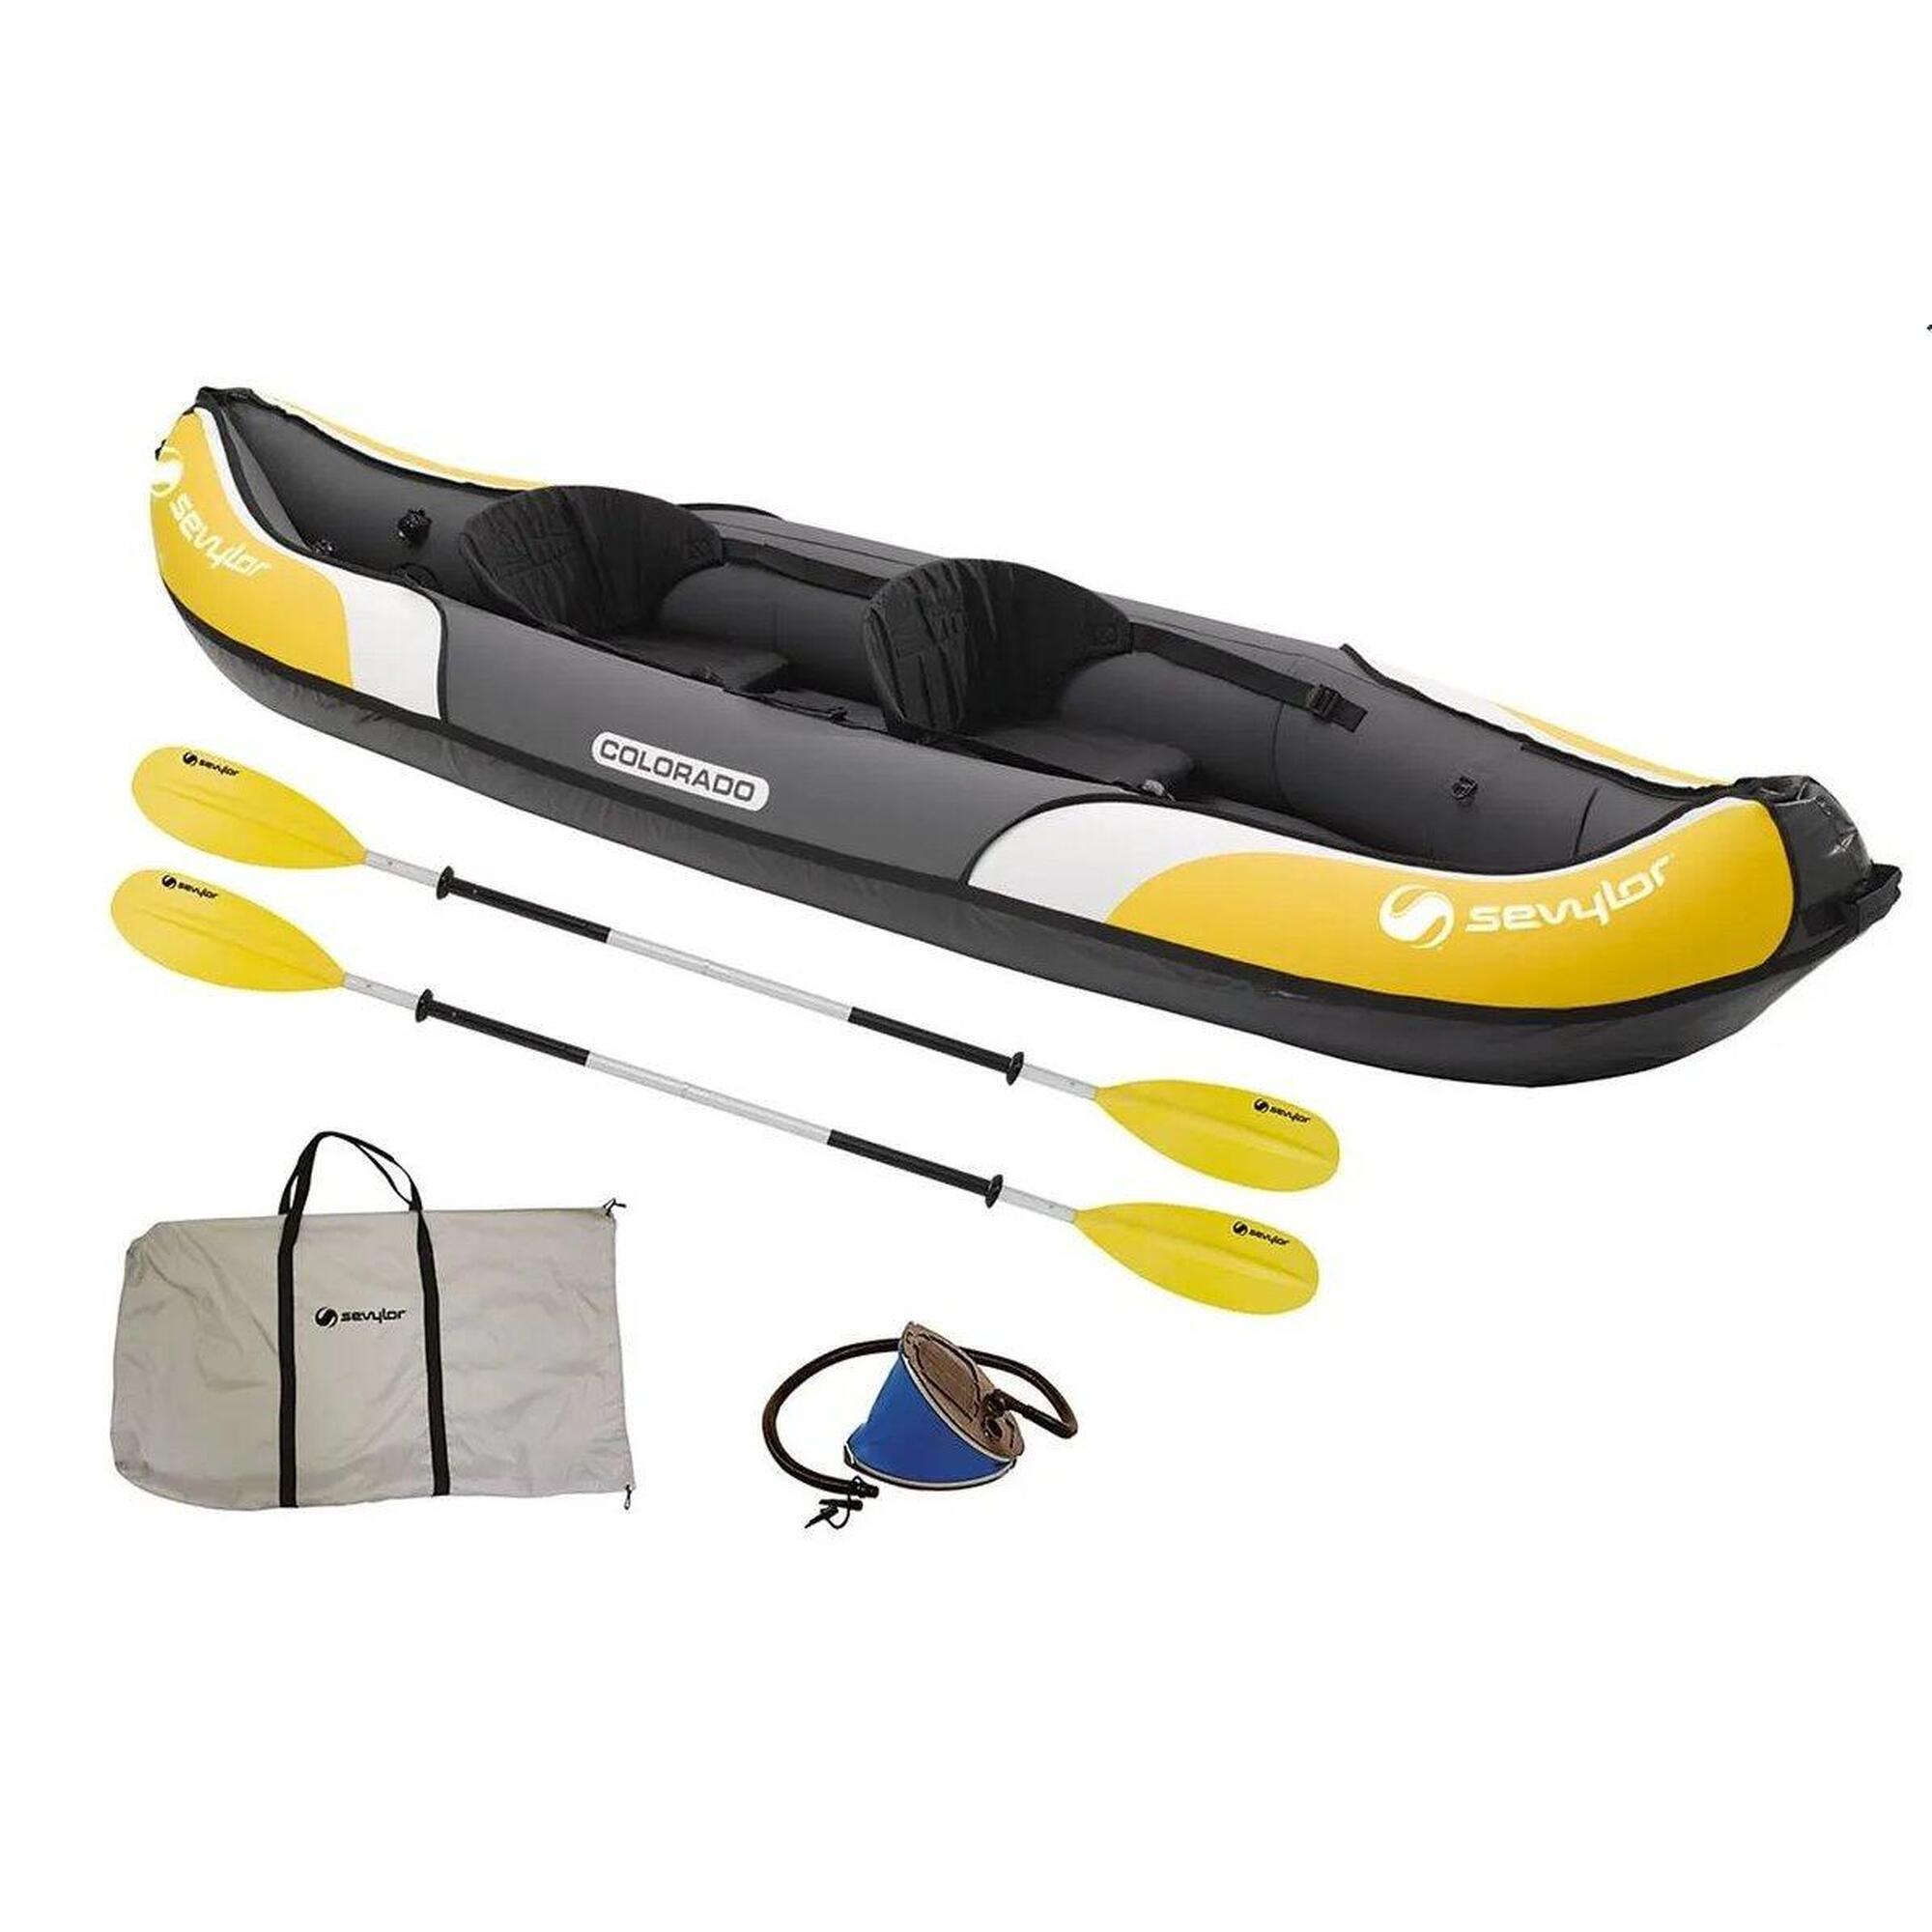 Sevylor Colorado Kit with 2 Paddles and Pump 1/5